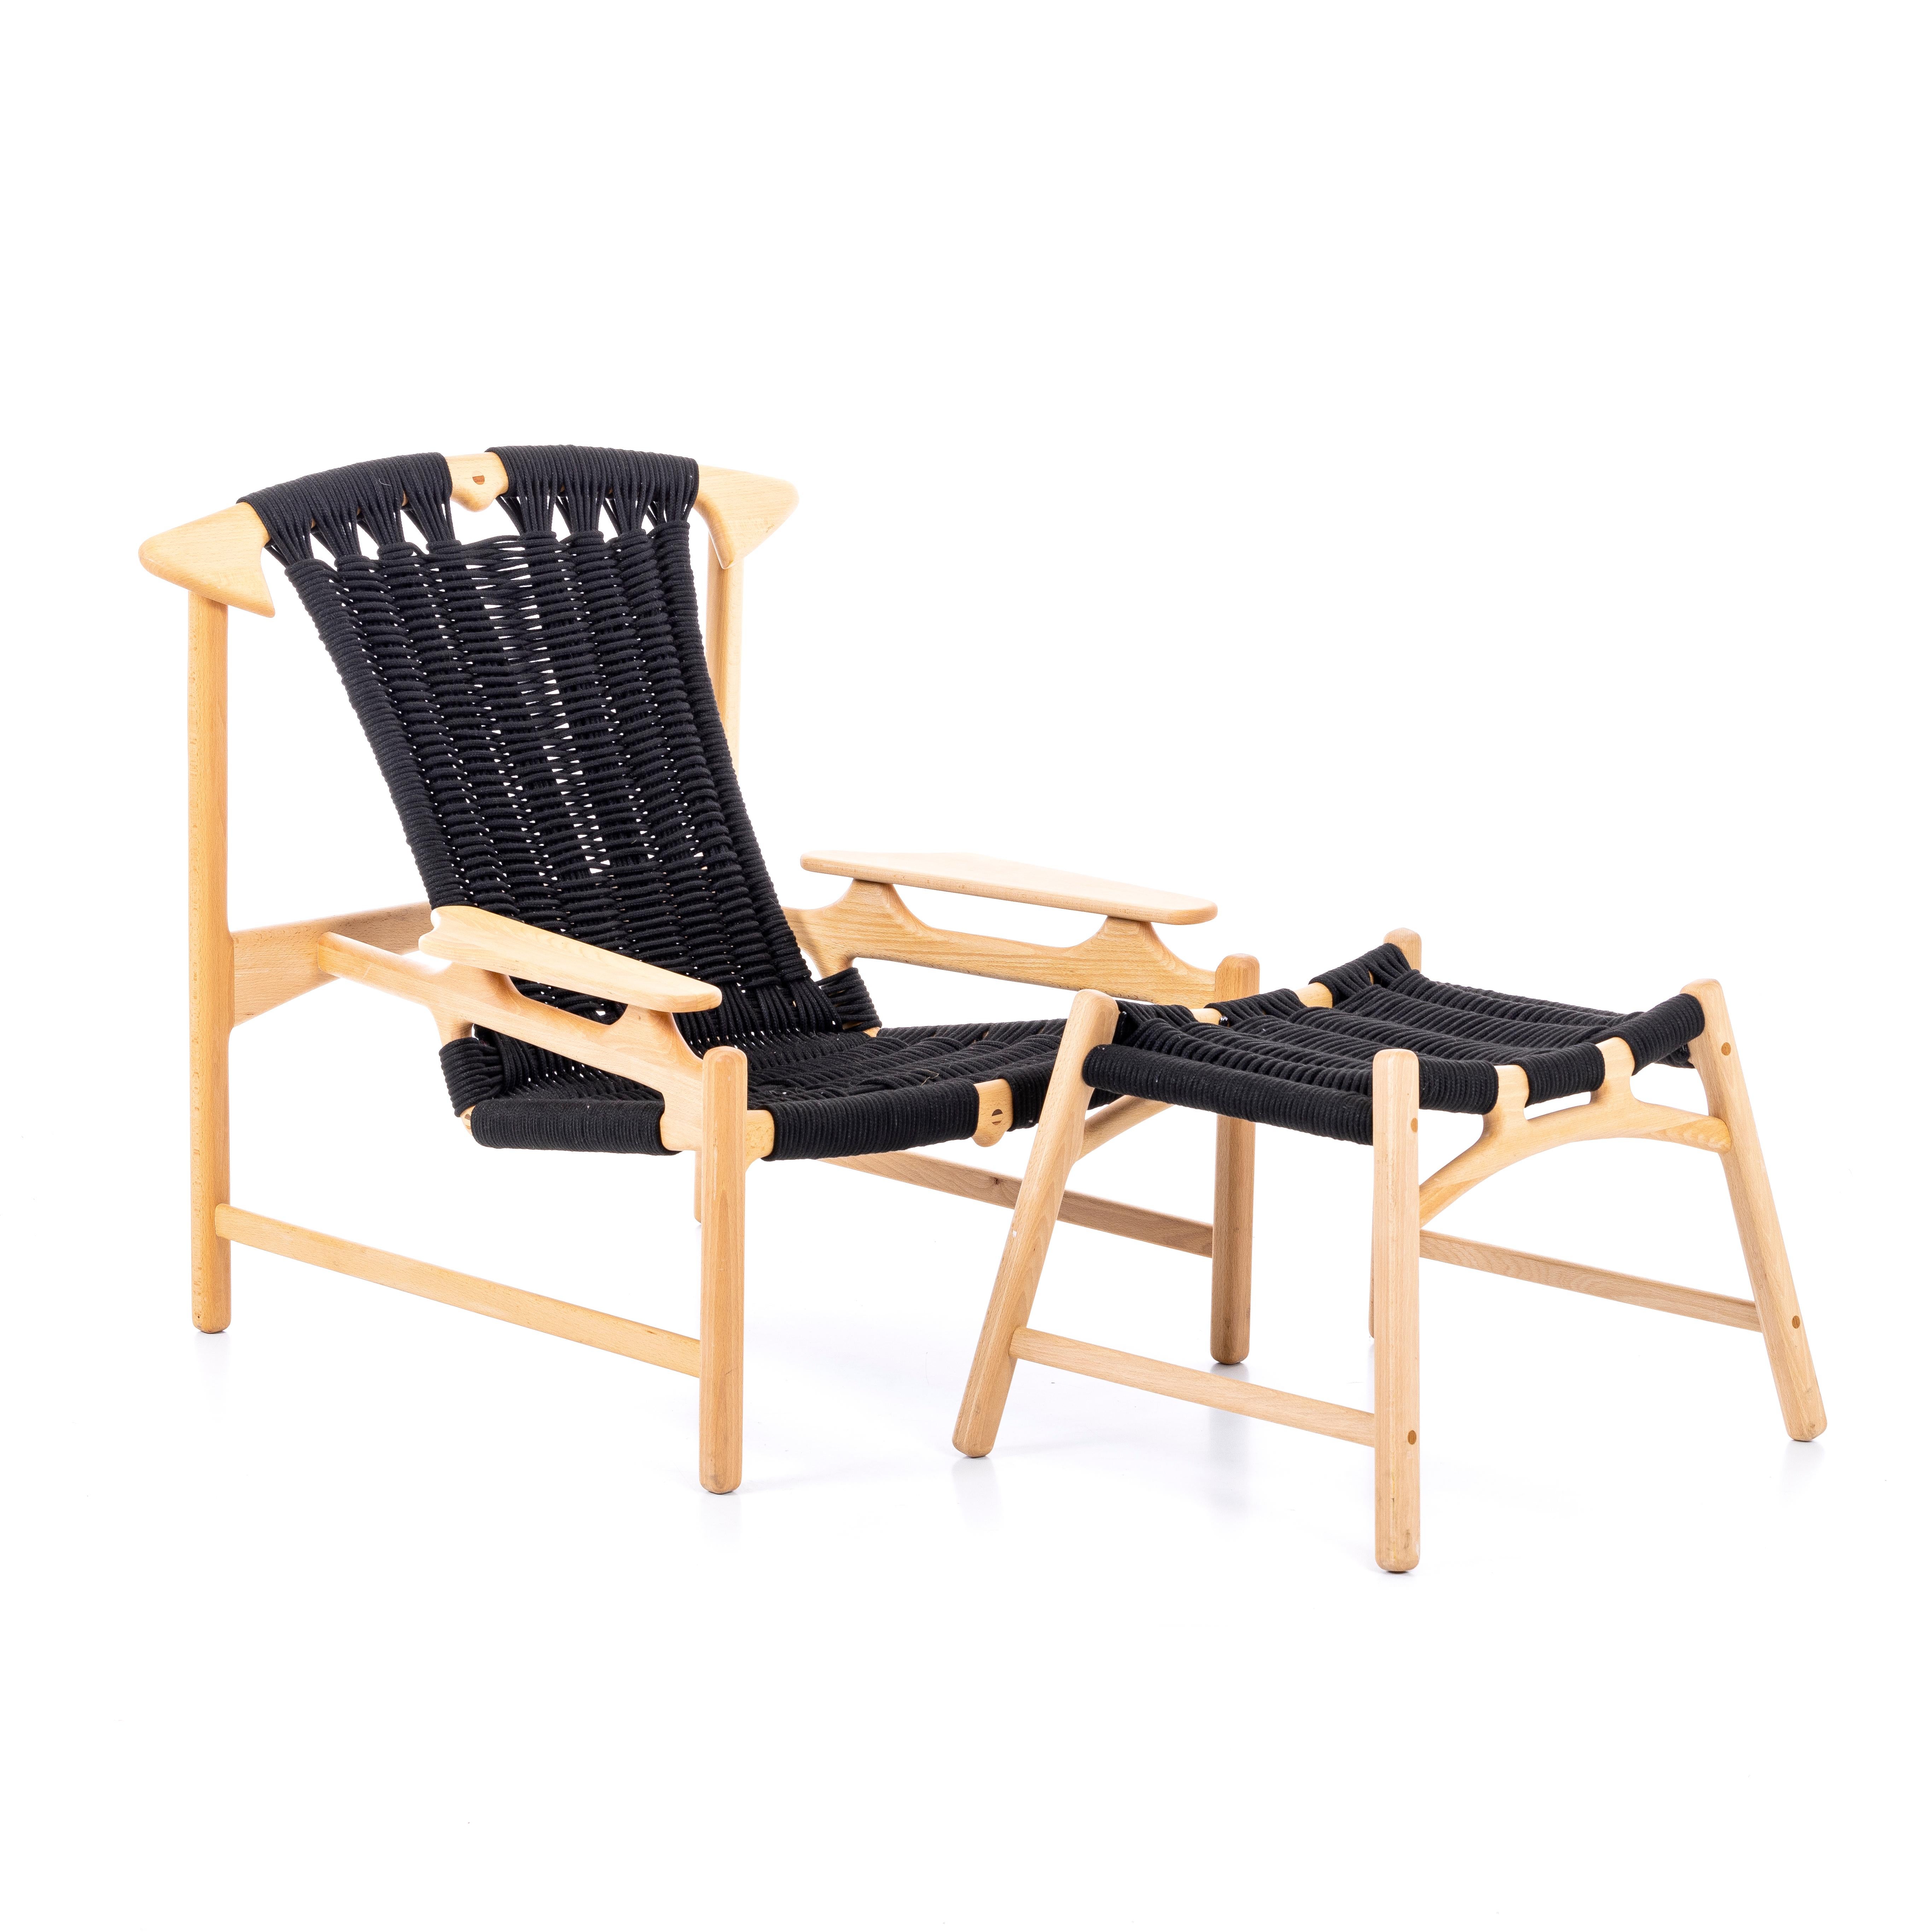 A fine sculptural Martin Godsk-Snedkeri lounge chair and ottoman 'Hunting chair', Model MG27. Made in Denmark, c.1990, in solid recycled beech, seat and back braided in black 6 mm pp line. Inlaid plugs in wenge wood. Designed and produced by Martin